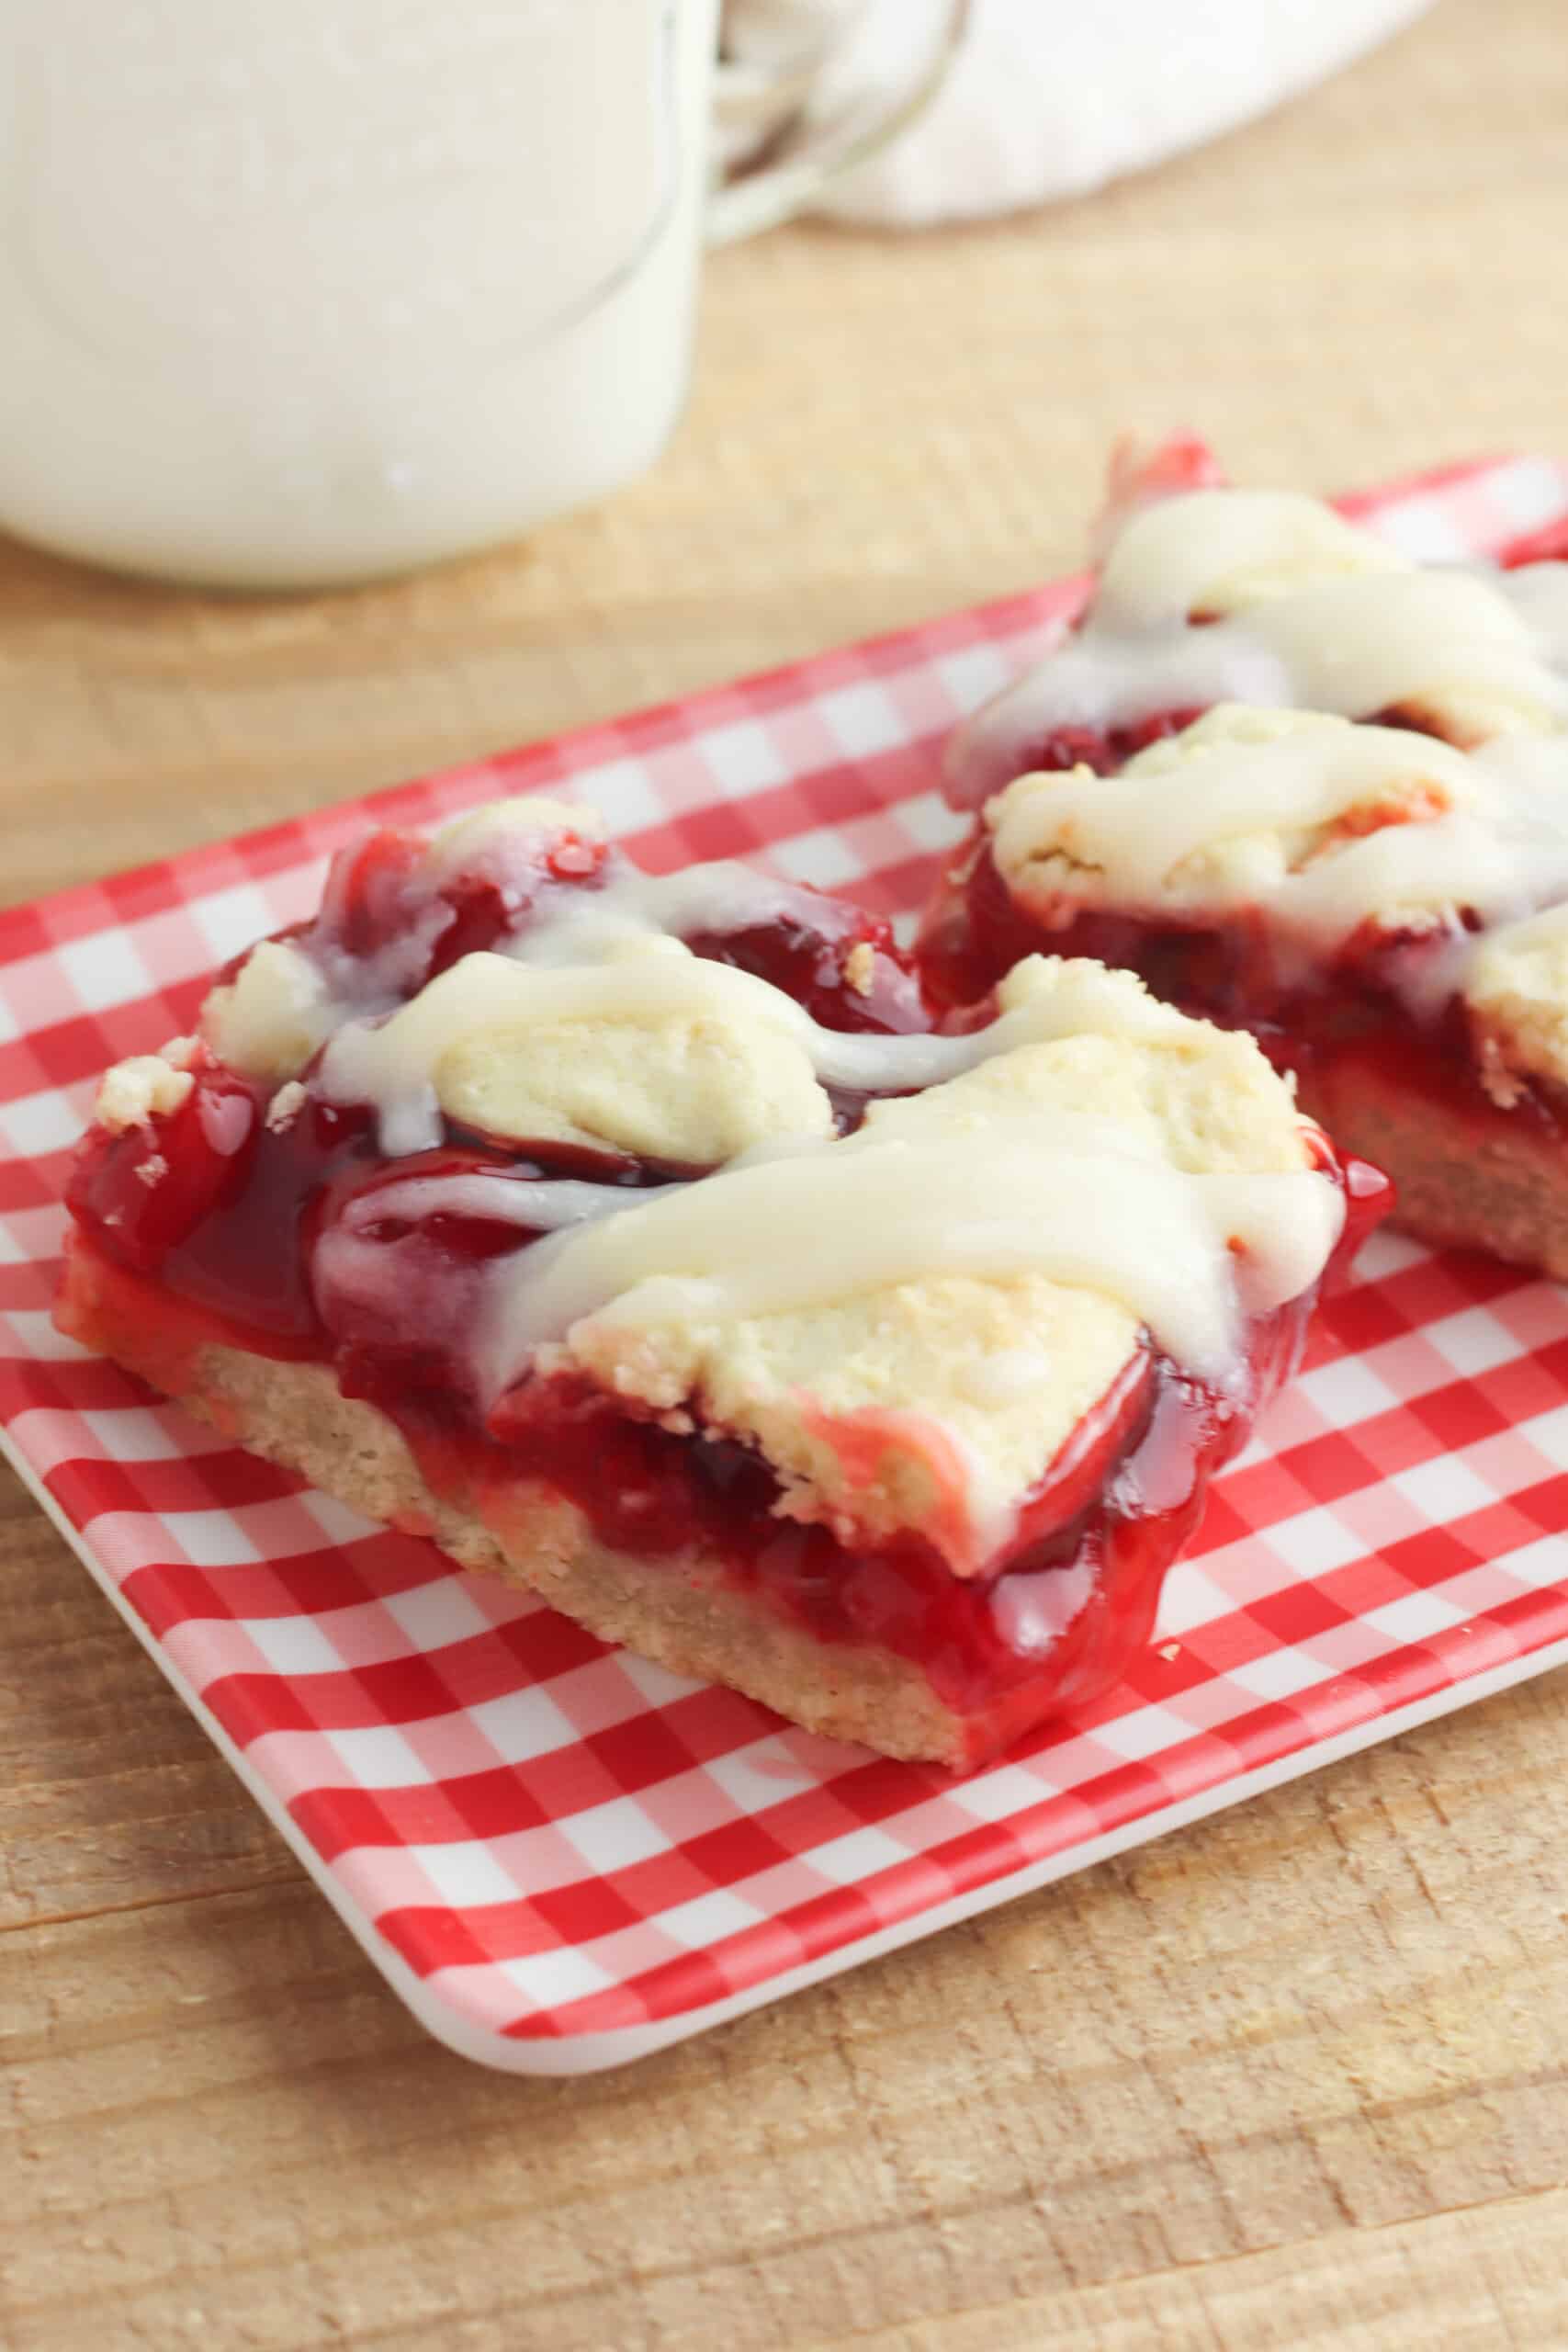 Cherry Pie Bars served on red and white checkered plate on a wooden table